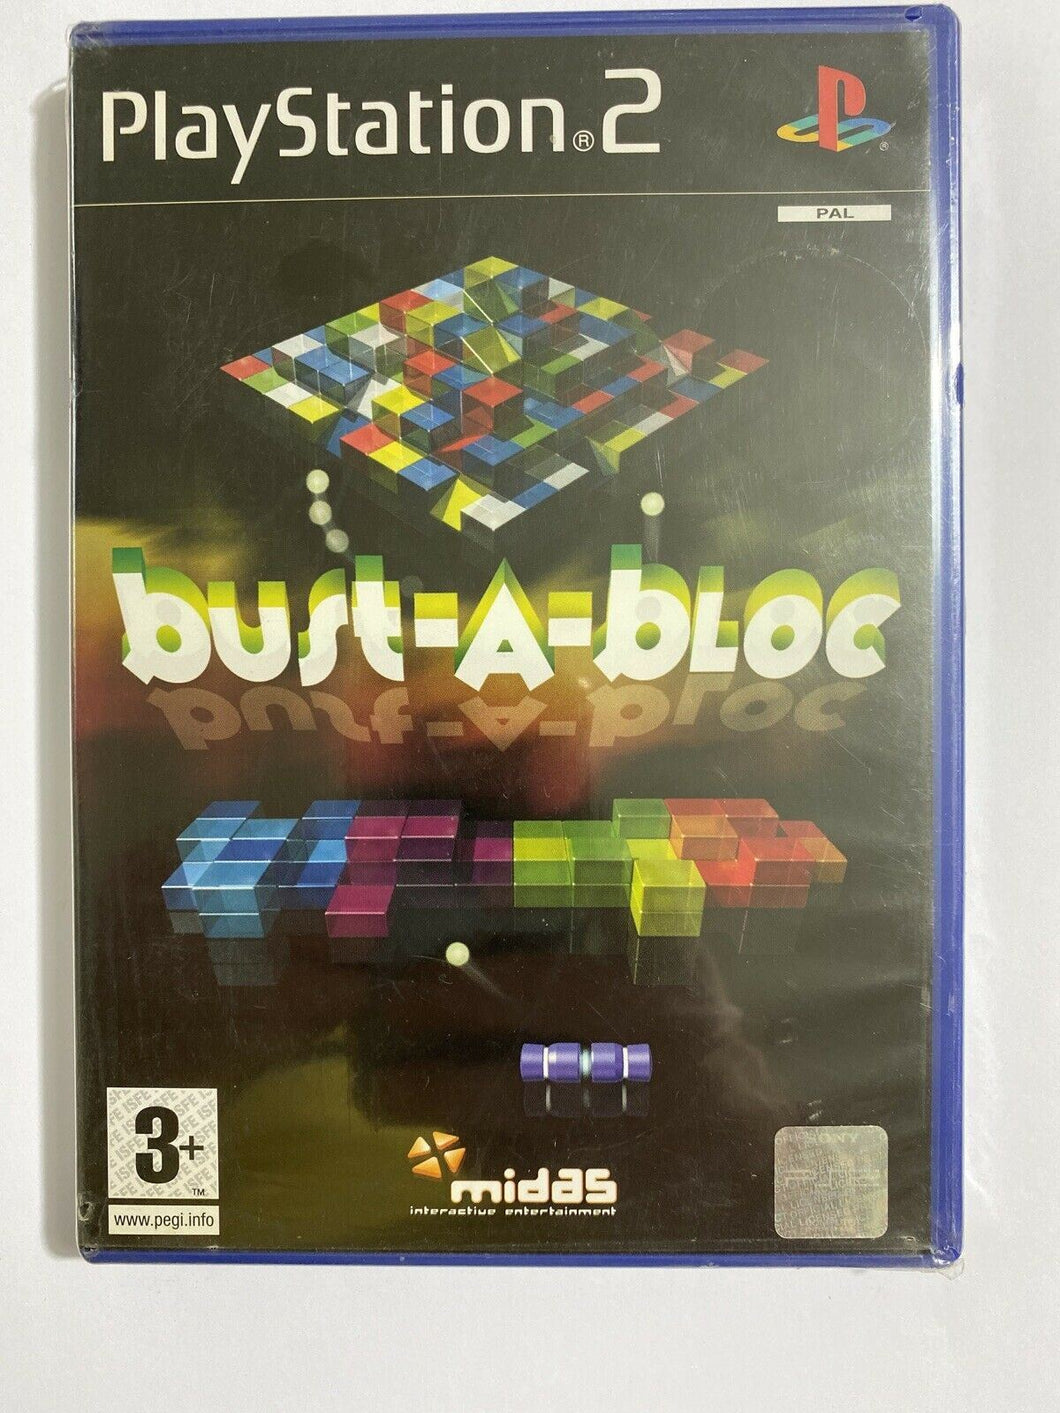 Bust a bloc - Playstation 2 Ps2